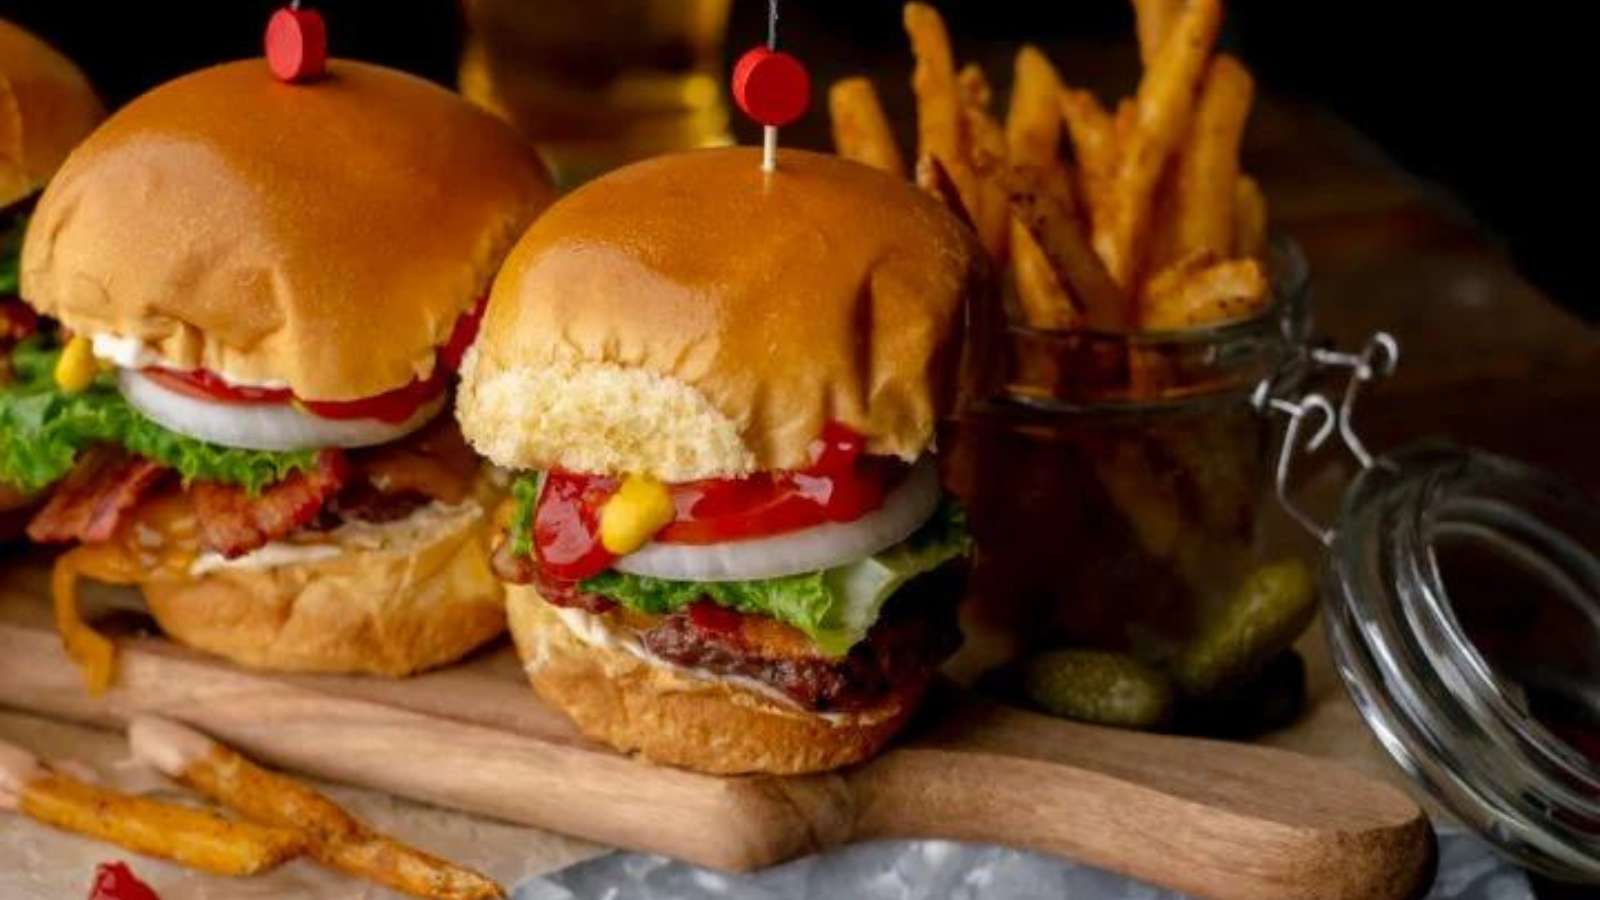 Burger sliders on a wooden cutting board.